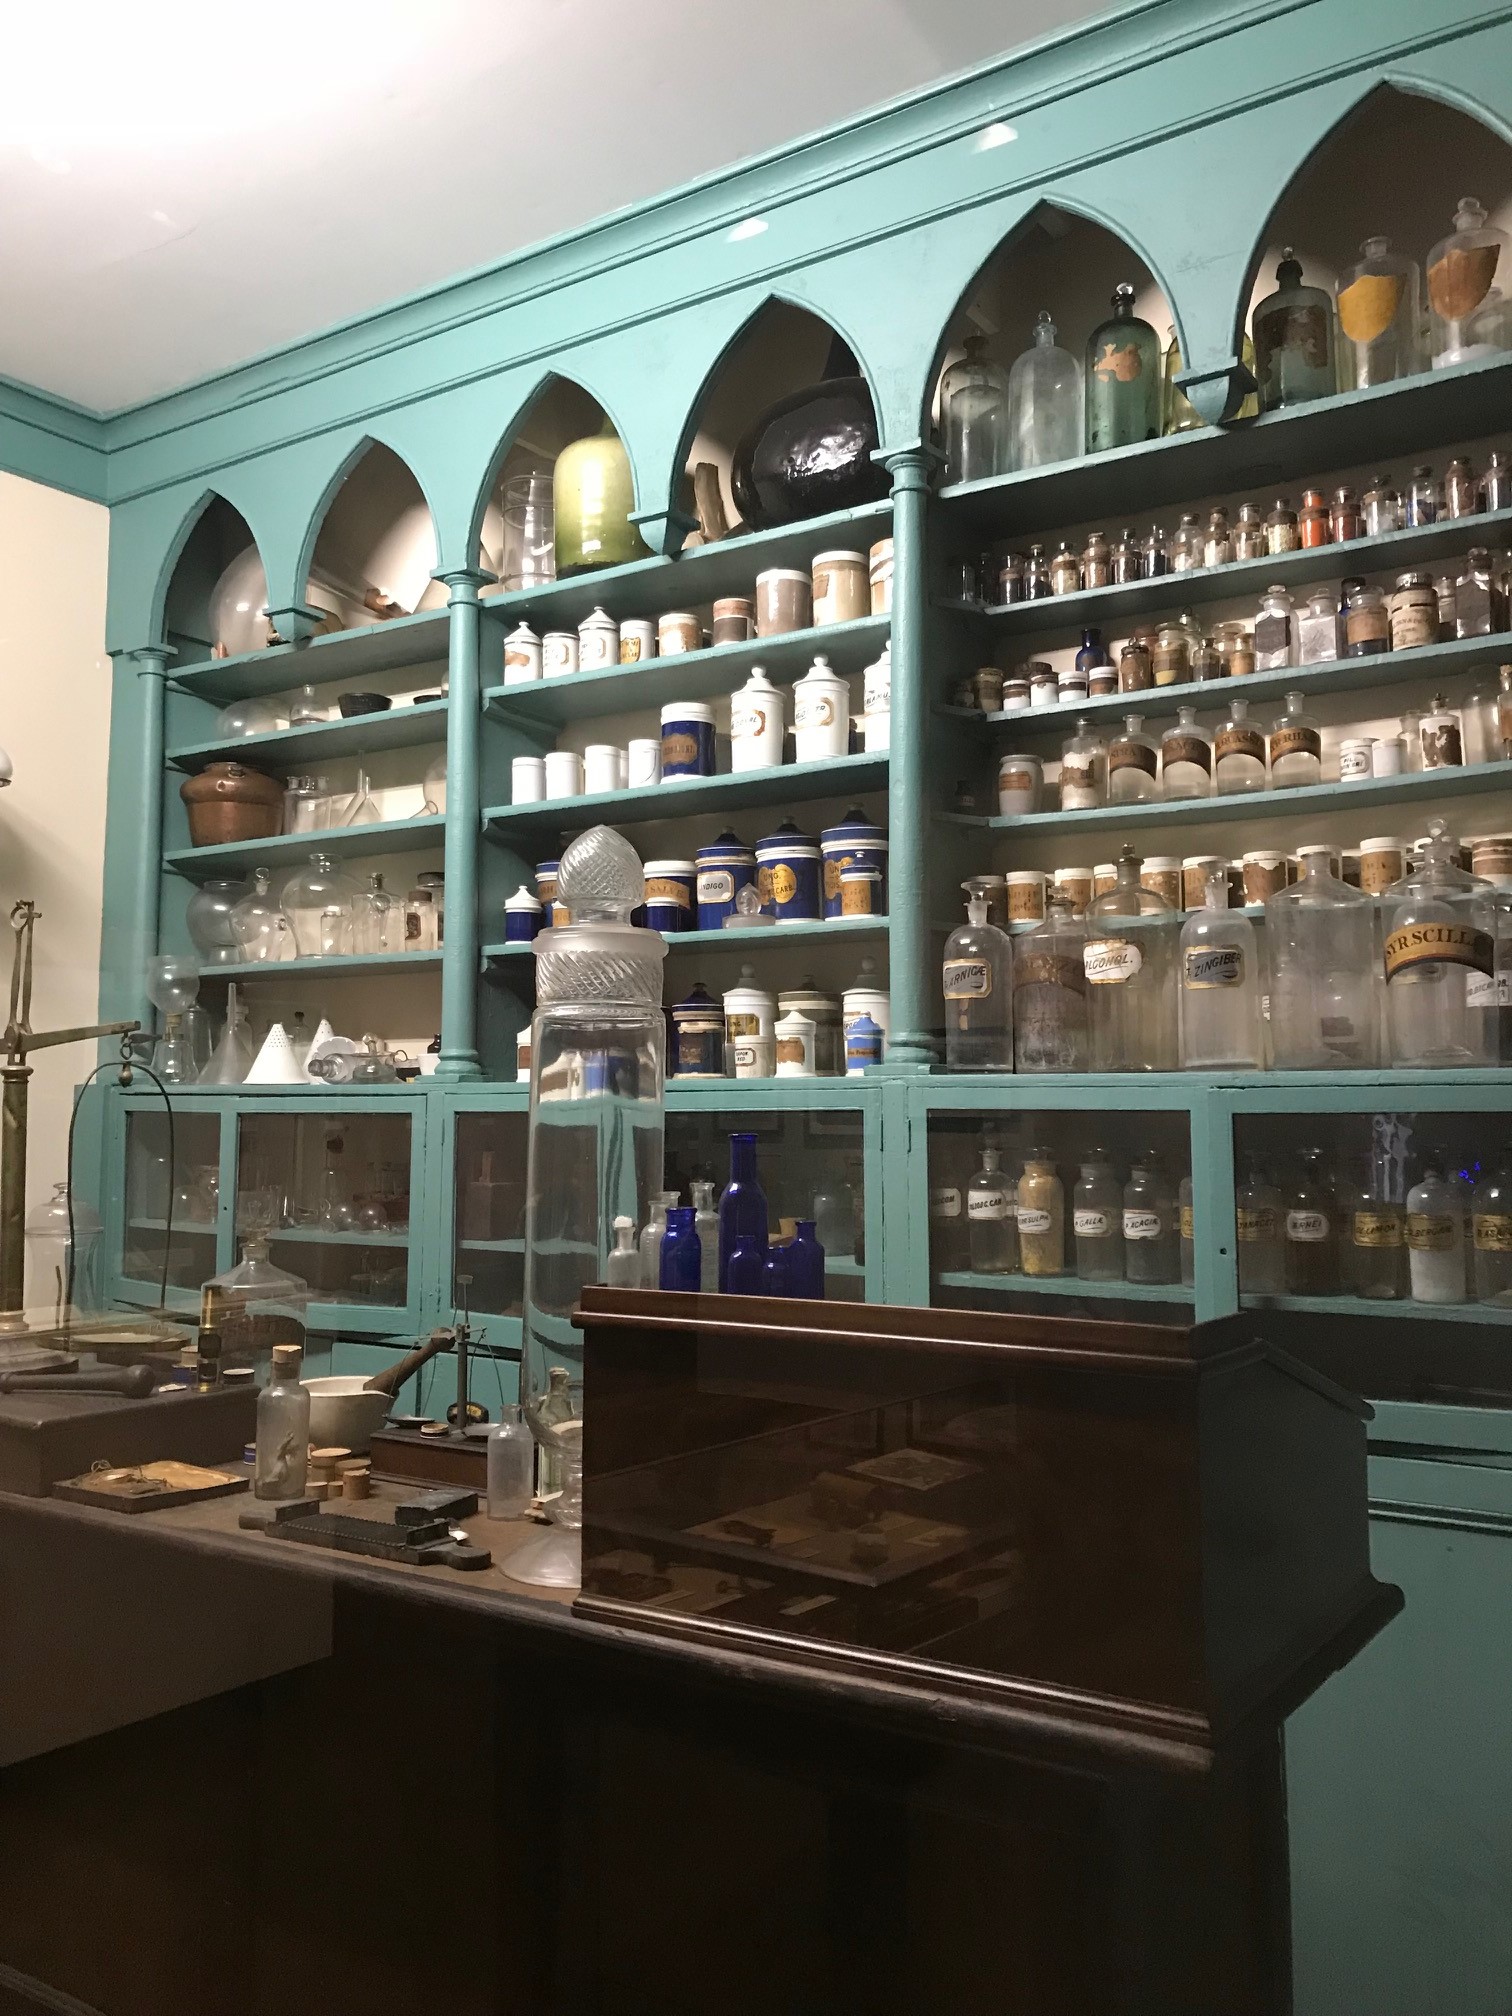 Conversations with a Curator: The Charleston Apothecary with Chief Curator Grahame Long